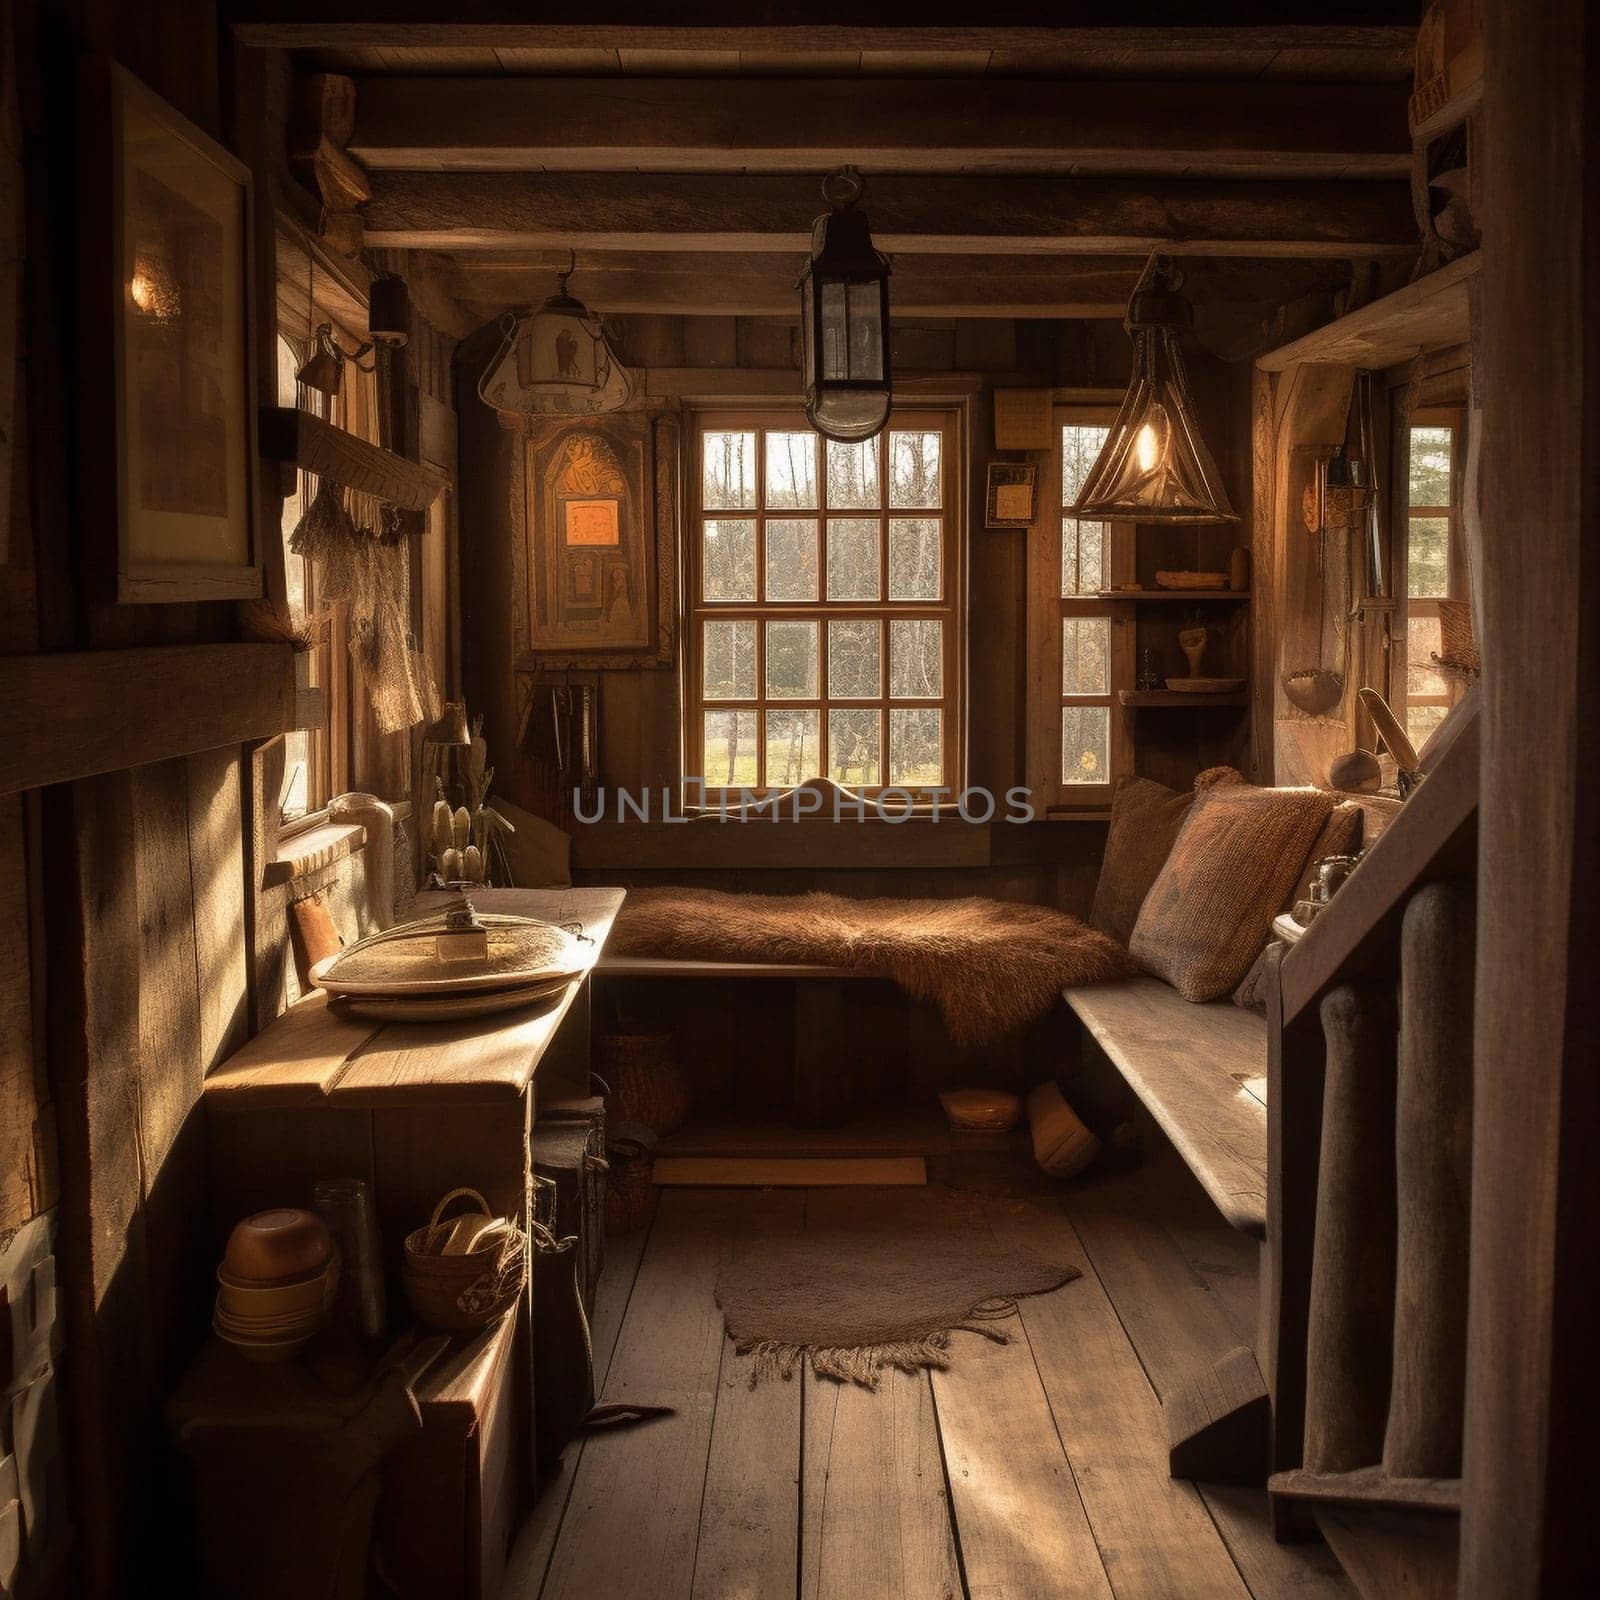 Cozy, Rustic Cabin or Cottage with Warm and Inviting Atmosphere by Sahin